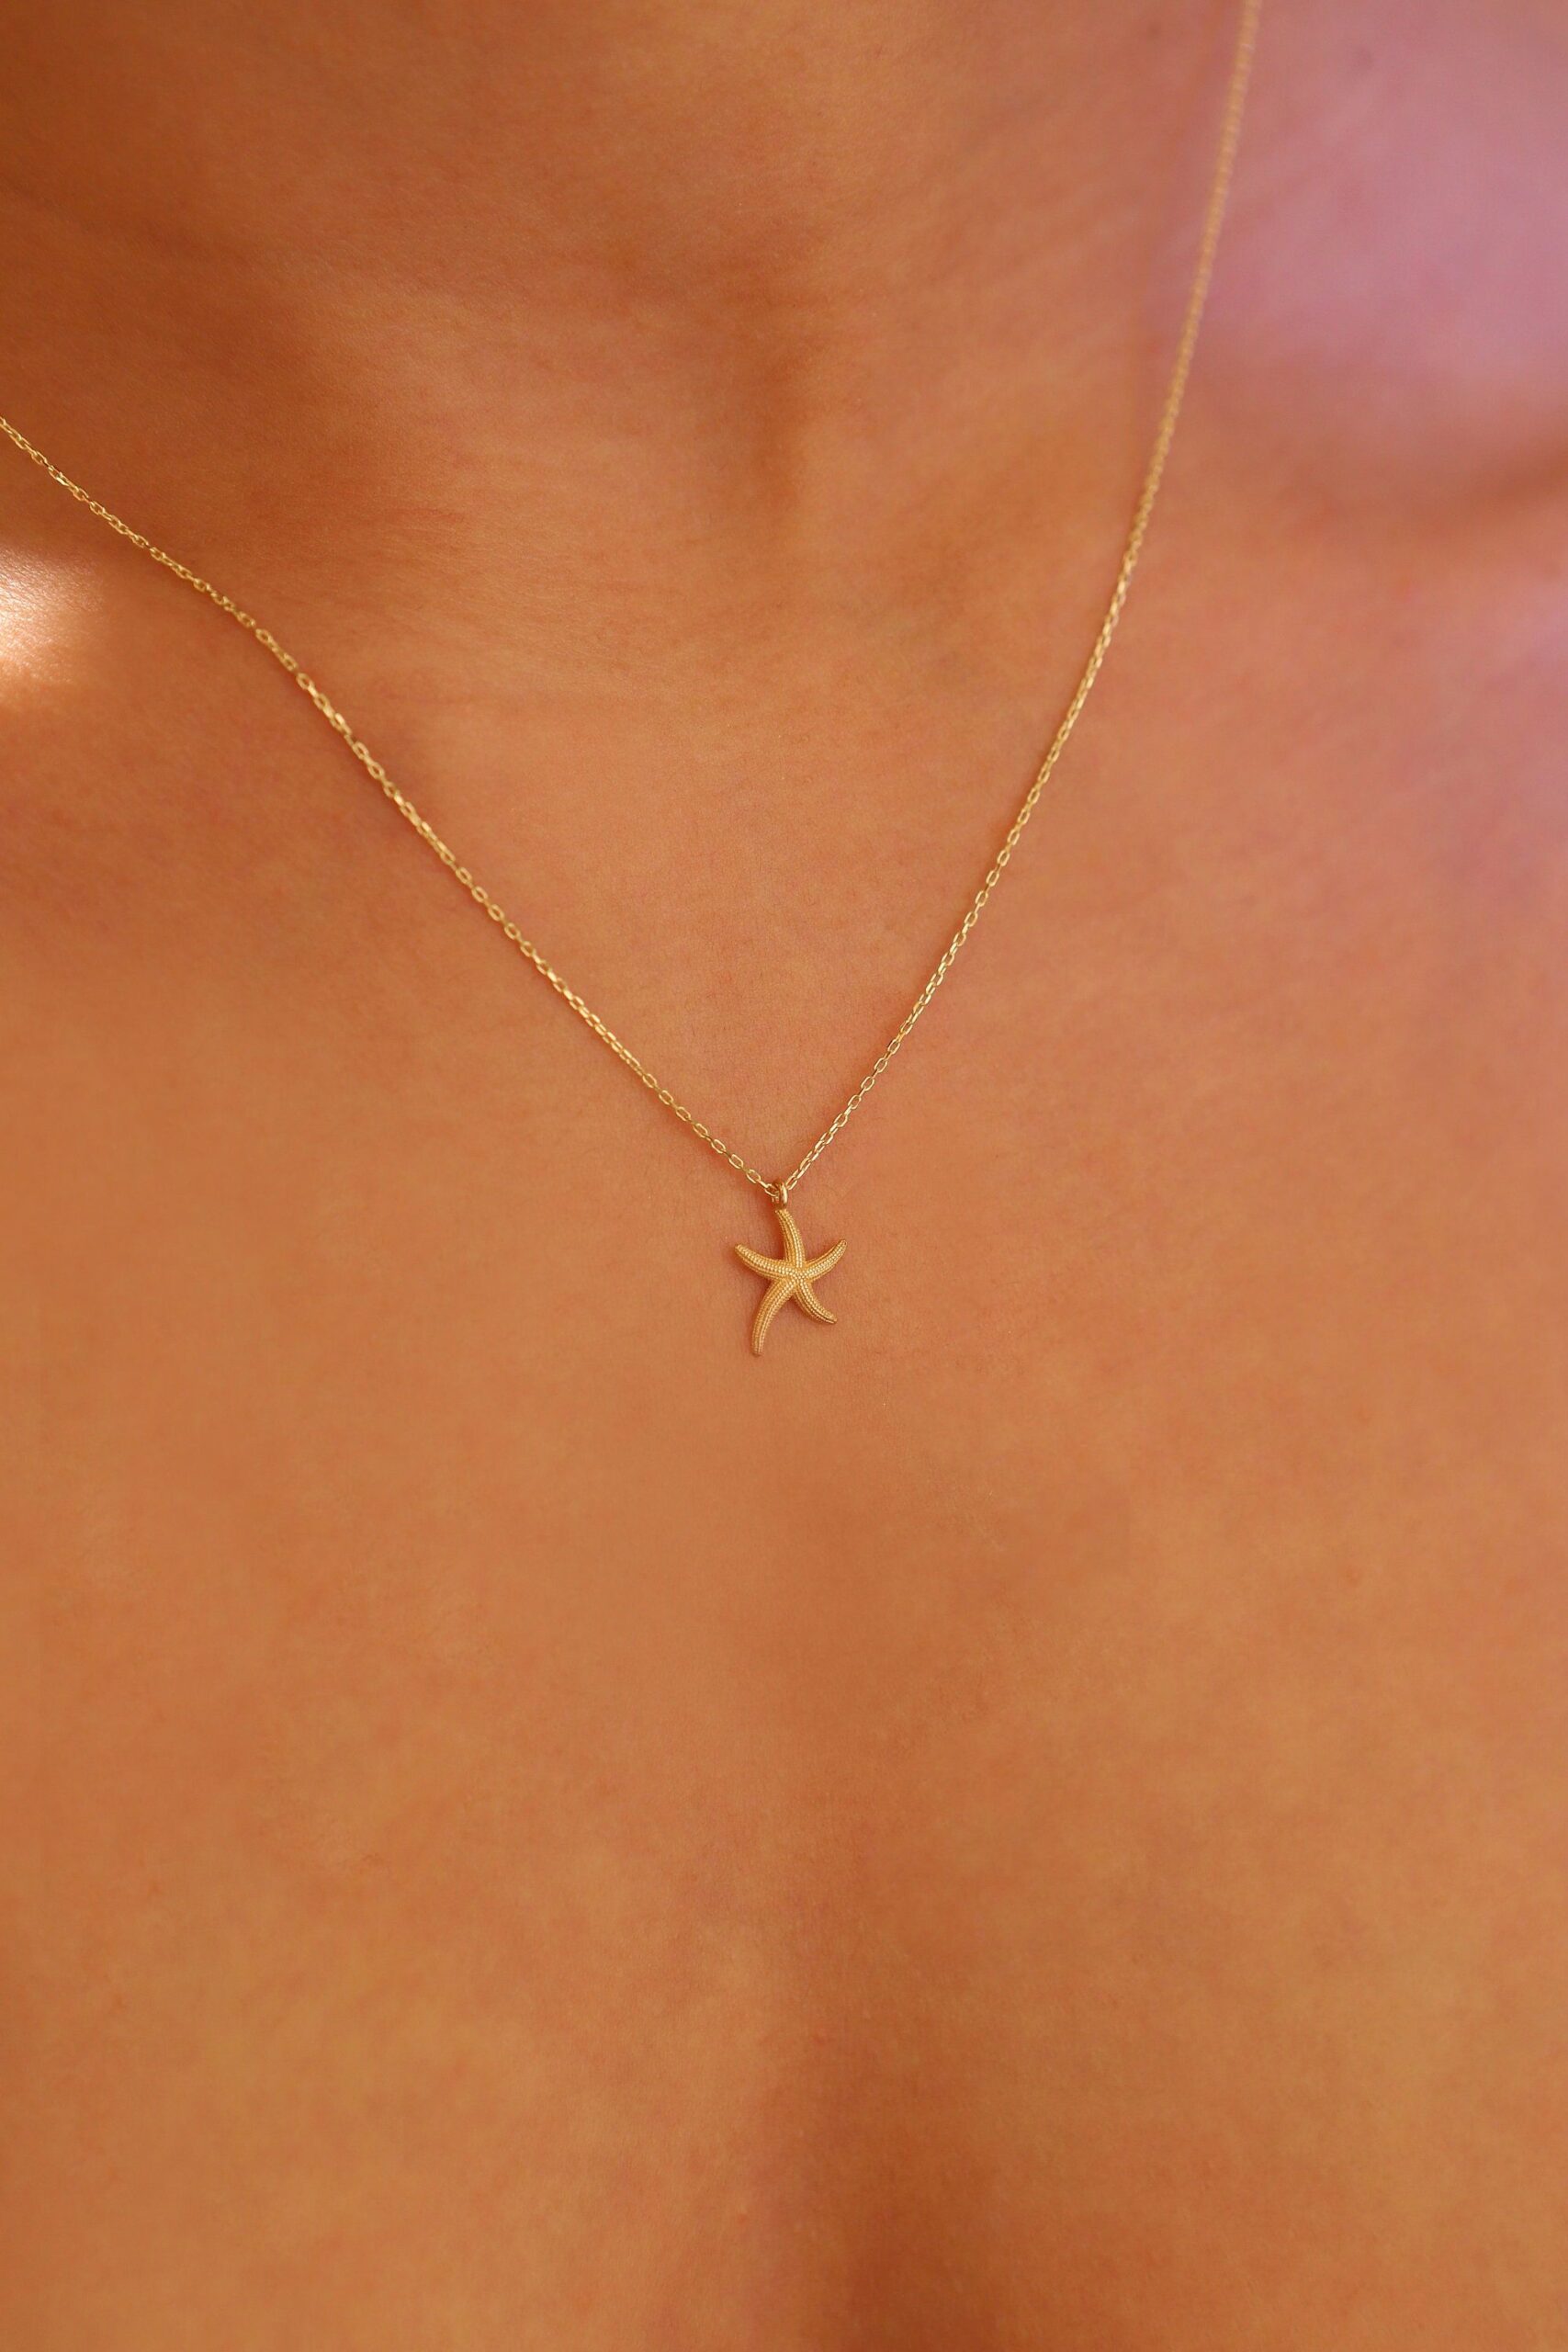 Gold necklaces for the ladies!